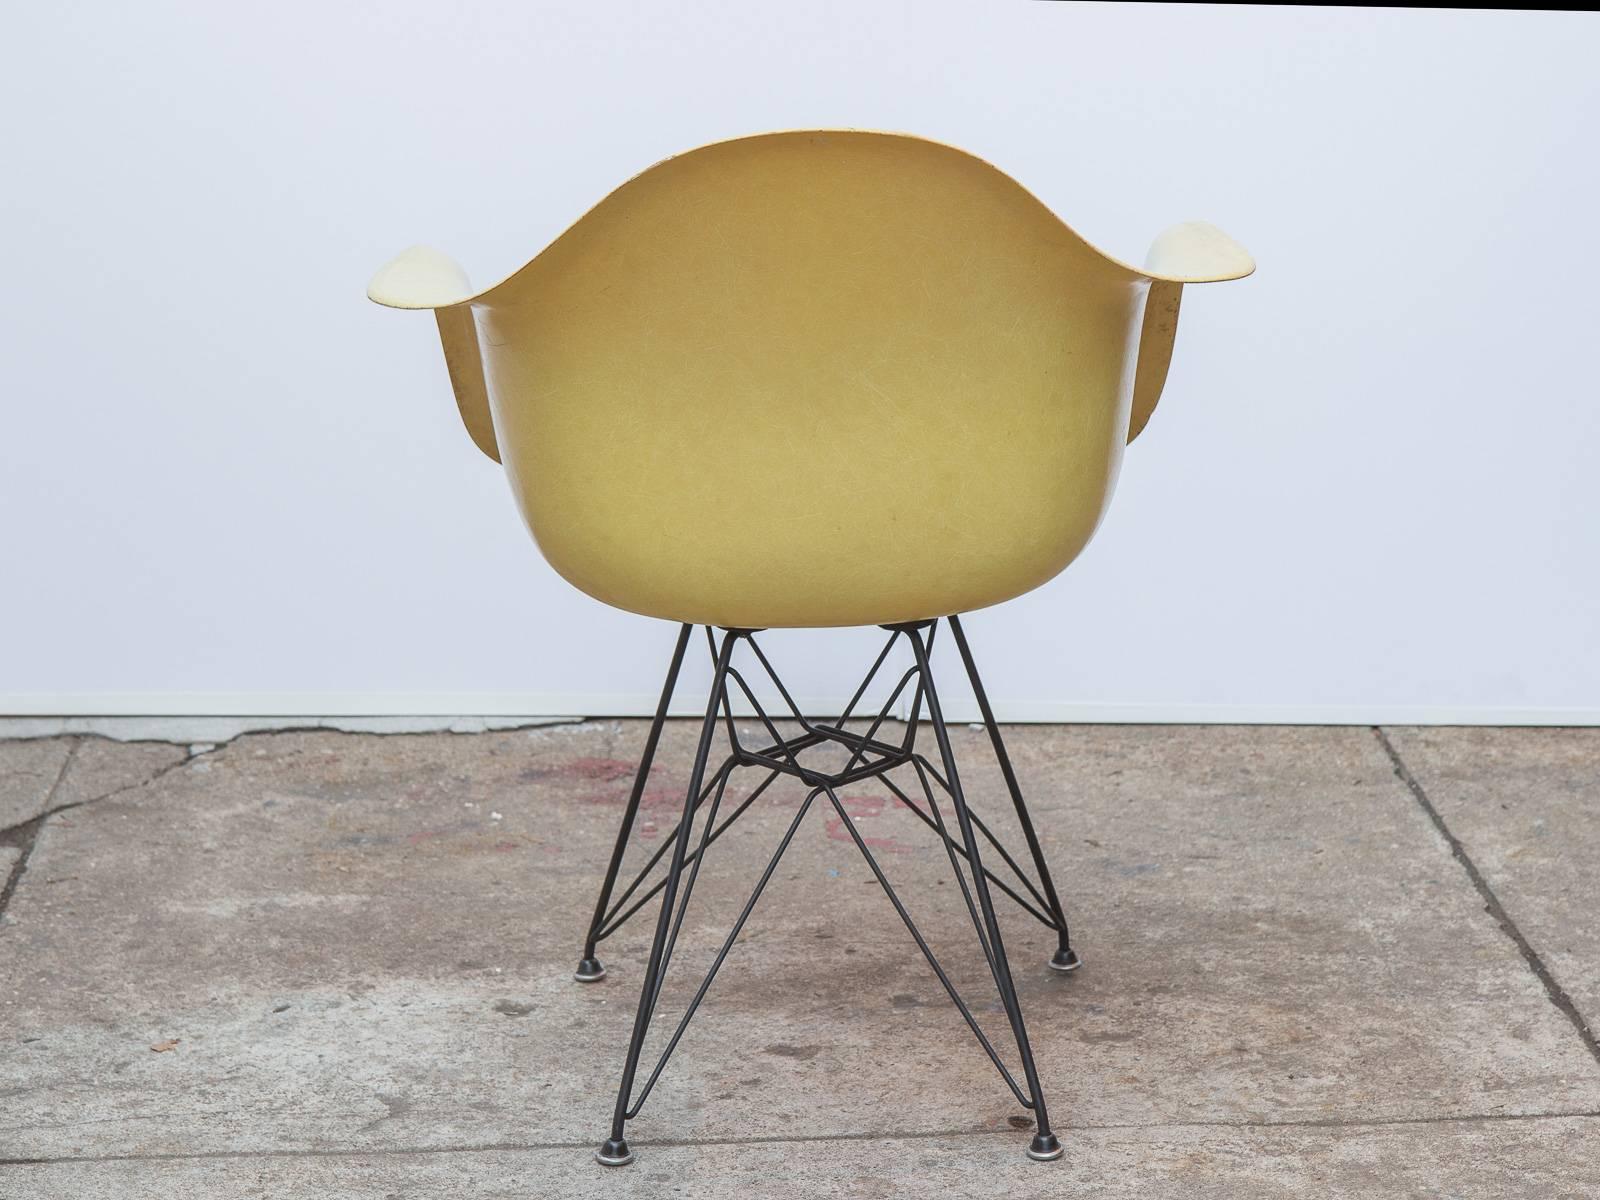 Classic Charles and Ray Eames molded fiberglass armchair in lemon yellow on the black Eiffel base for Herman Miller. Original finish with distinct thread texture. Herman Miller stamp on the underside. Other colors and base styles available, inquire